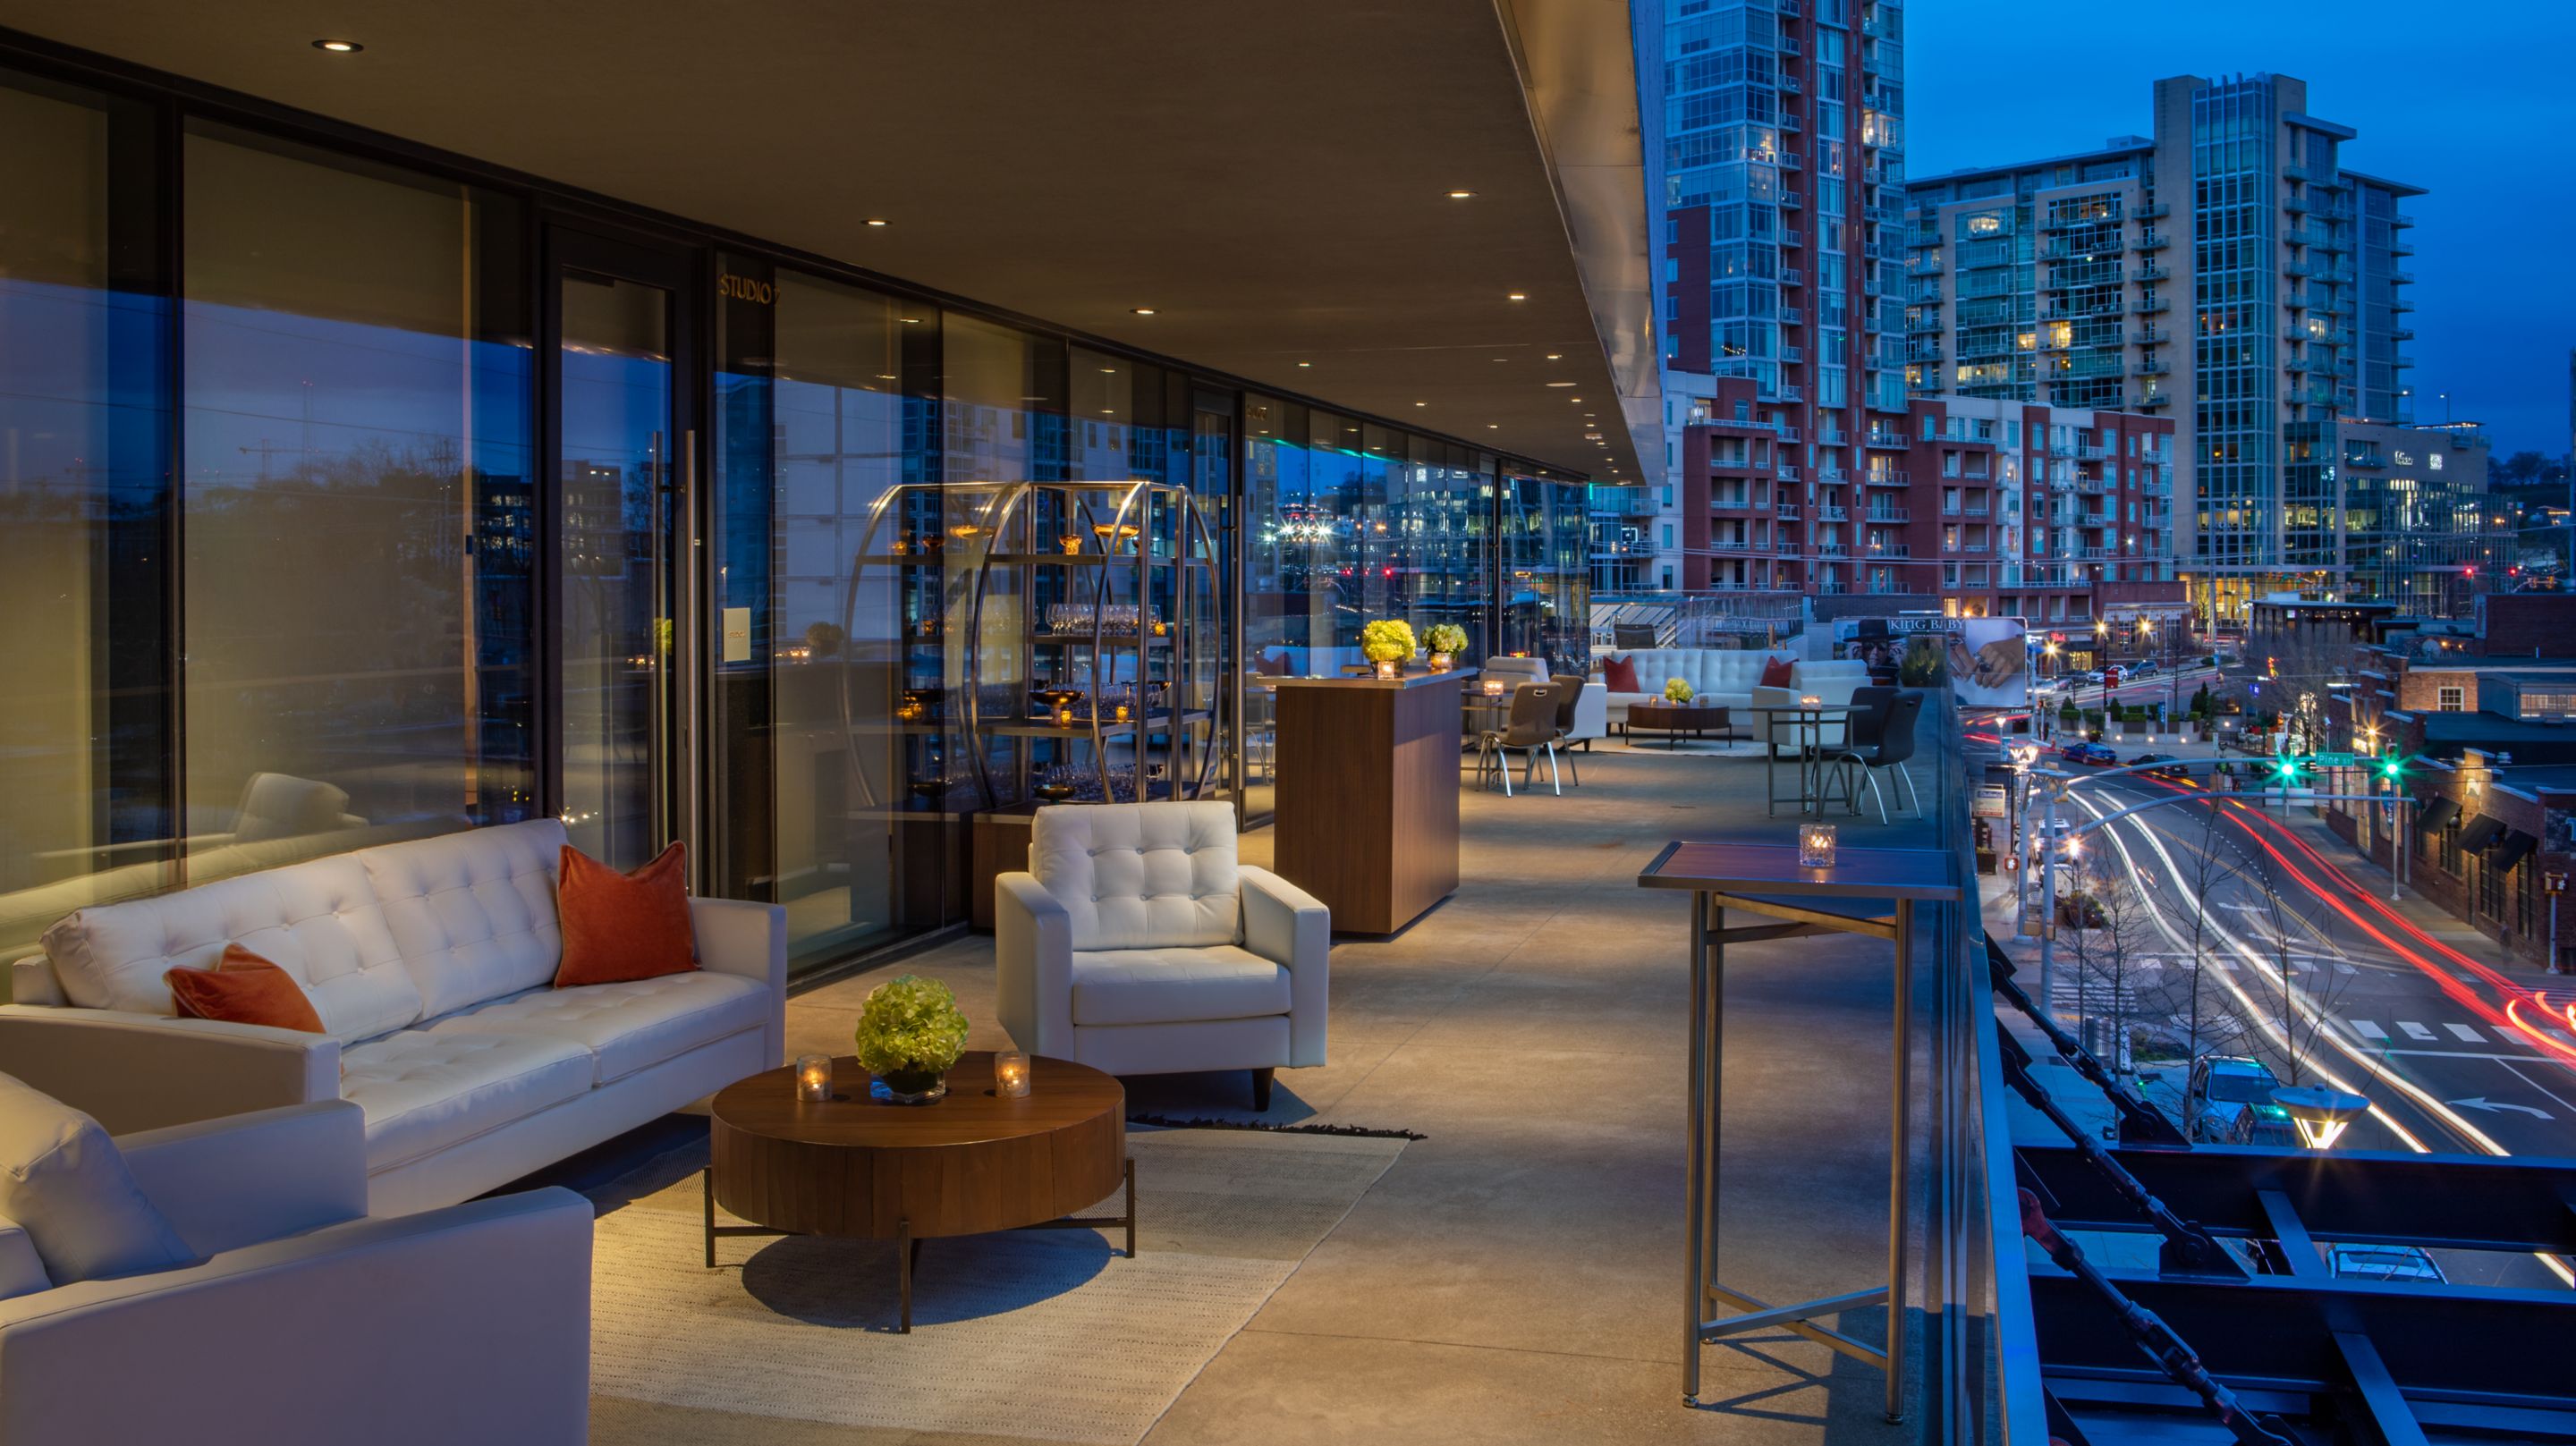 Hotel terrace lounge area with couch and chairs and view of city buildings.